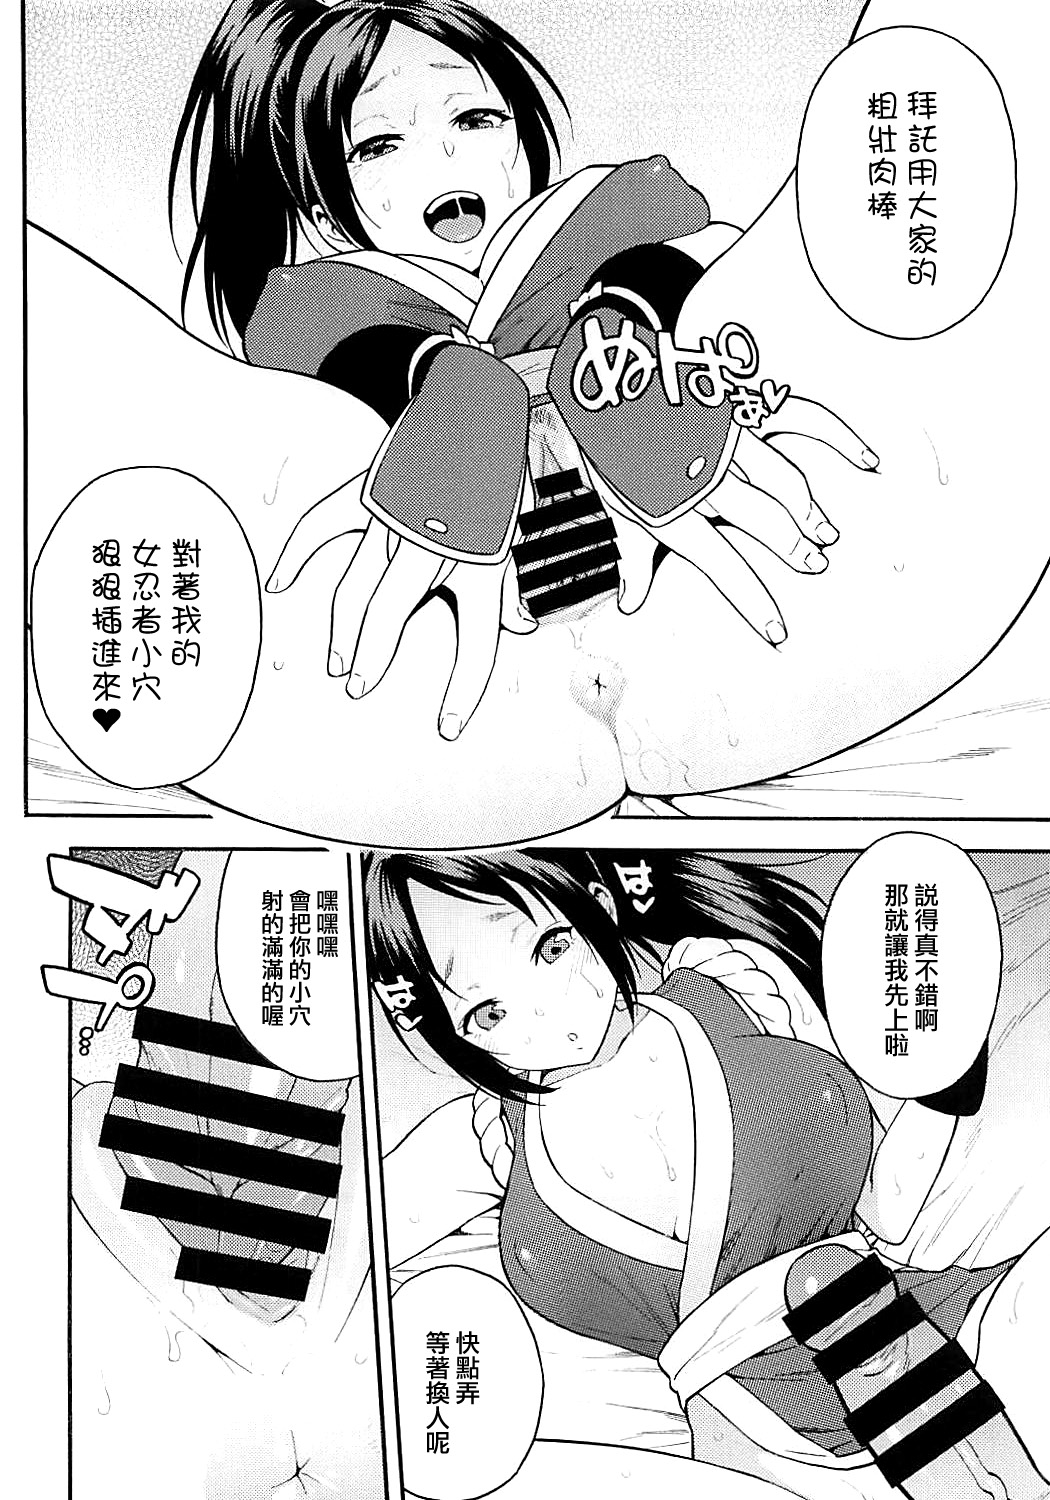 (COMIC1☆13) [SOLID AIR (Zonda)] Inmairan (King of Fighters) [Chinese] [无毒汉化组] page 6 full